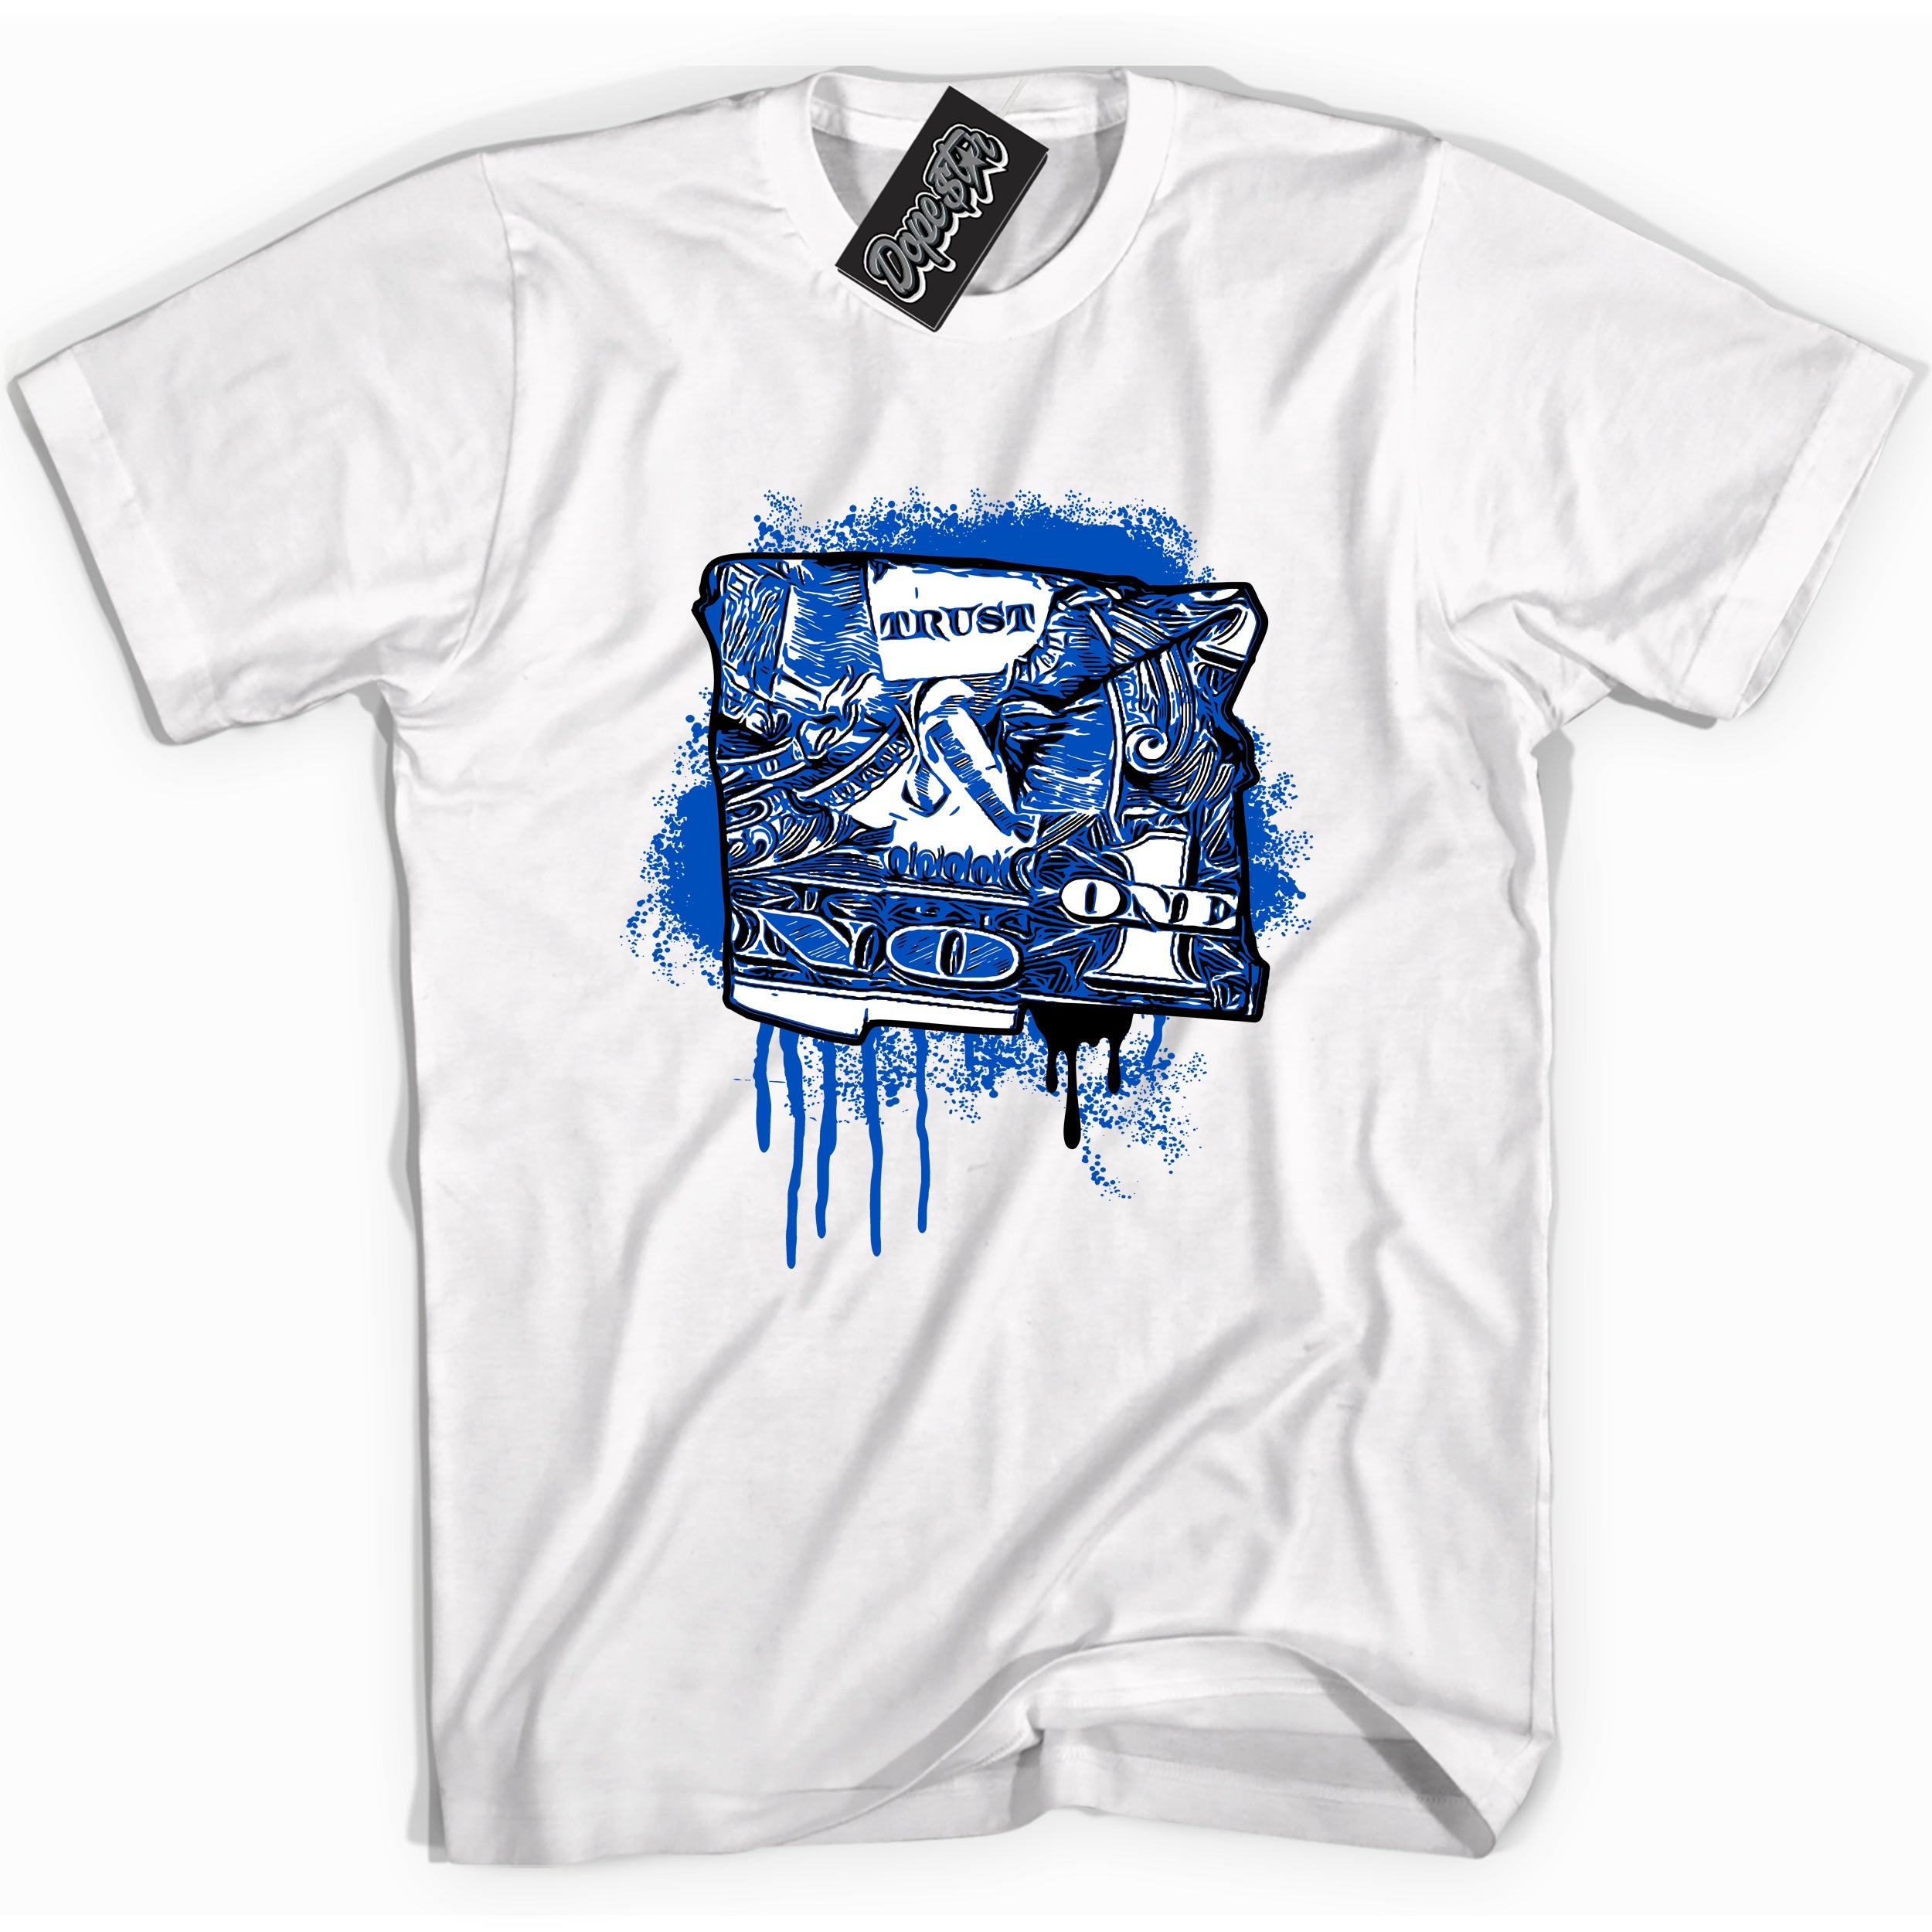 Cool White graphic tee with "Trust No One Dollar" design, that perfectly matches Royal Reimagined 1s sneakers 